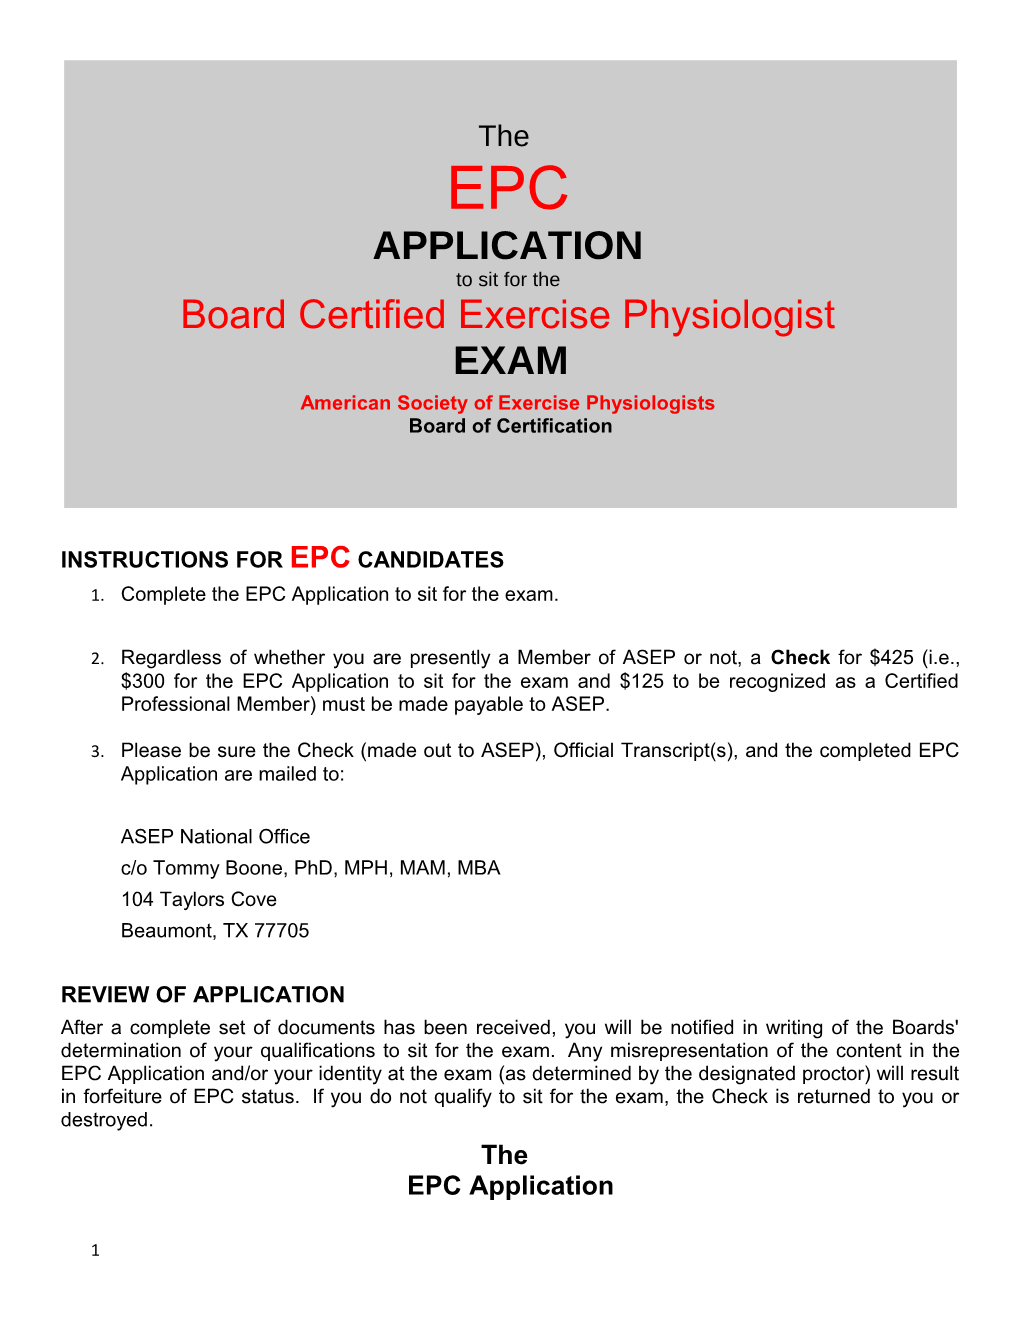 Complete the Epcapplication to Sit for the Exam